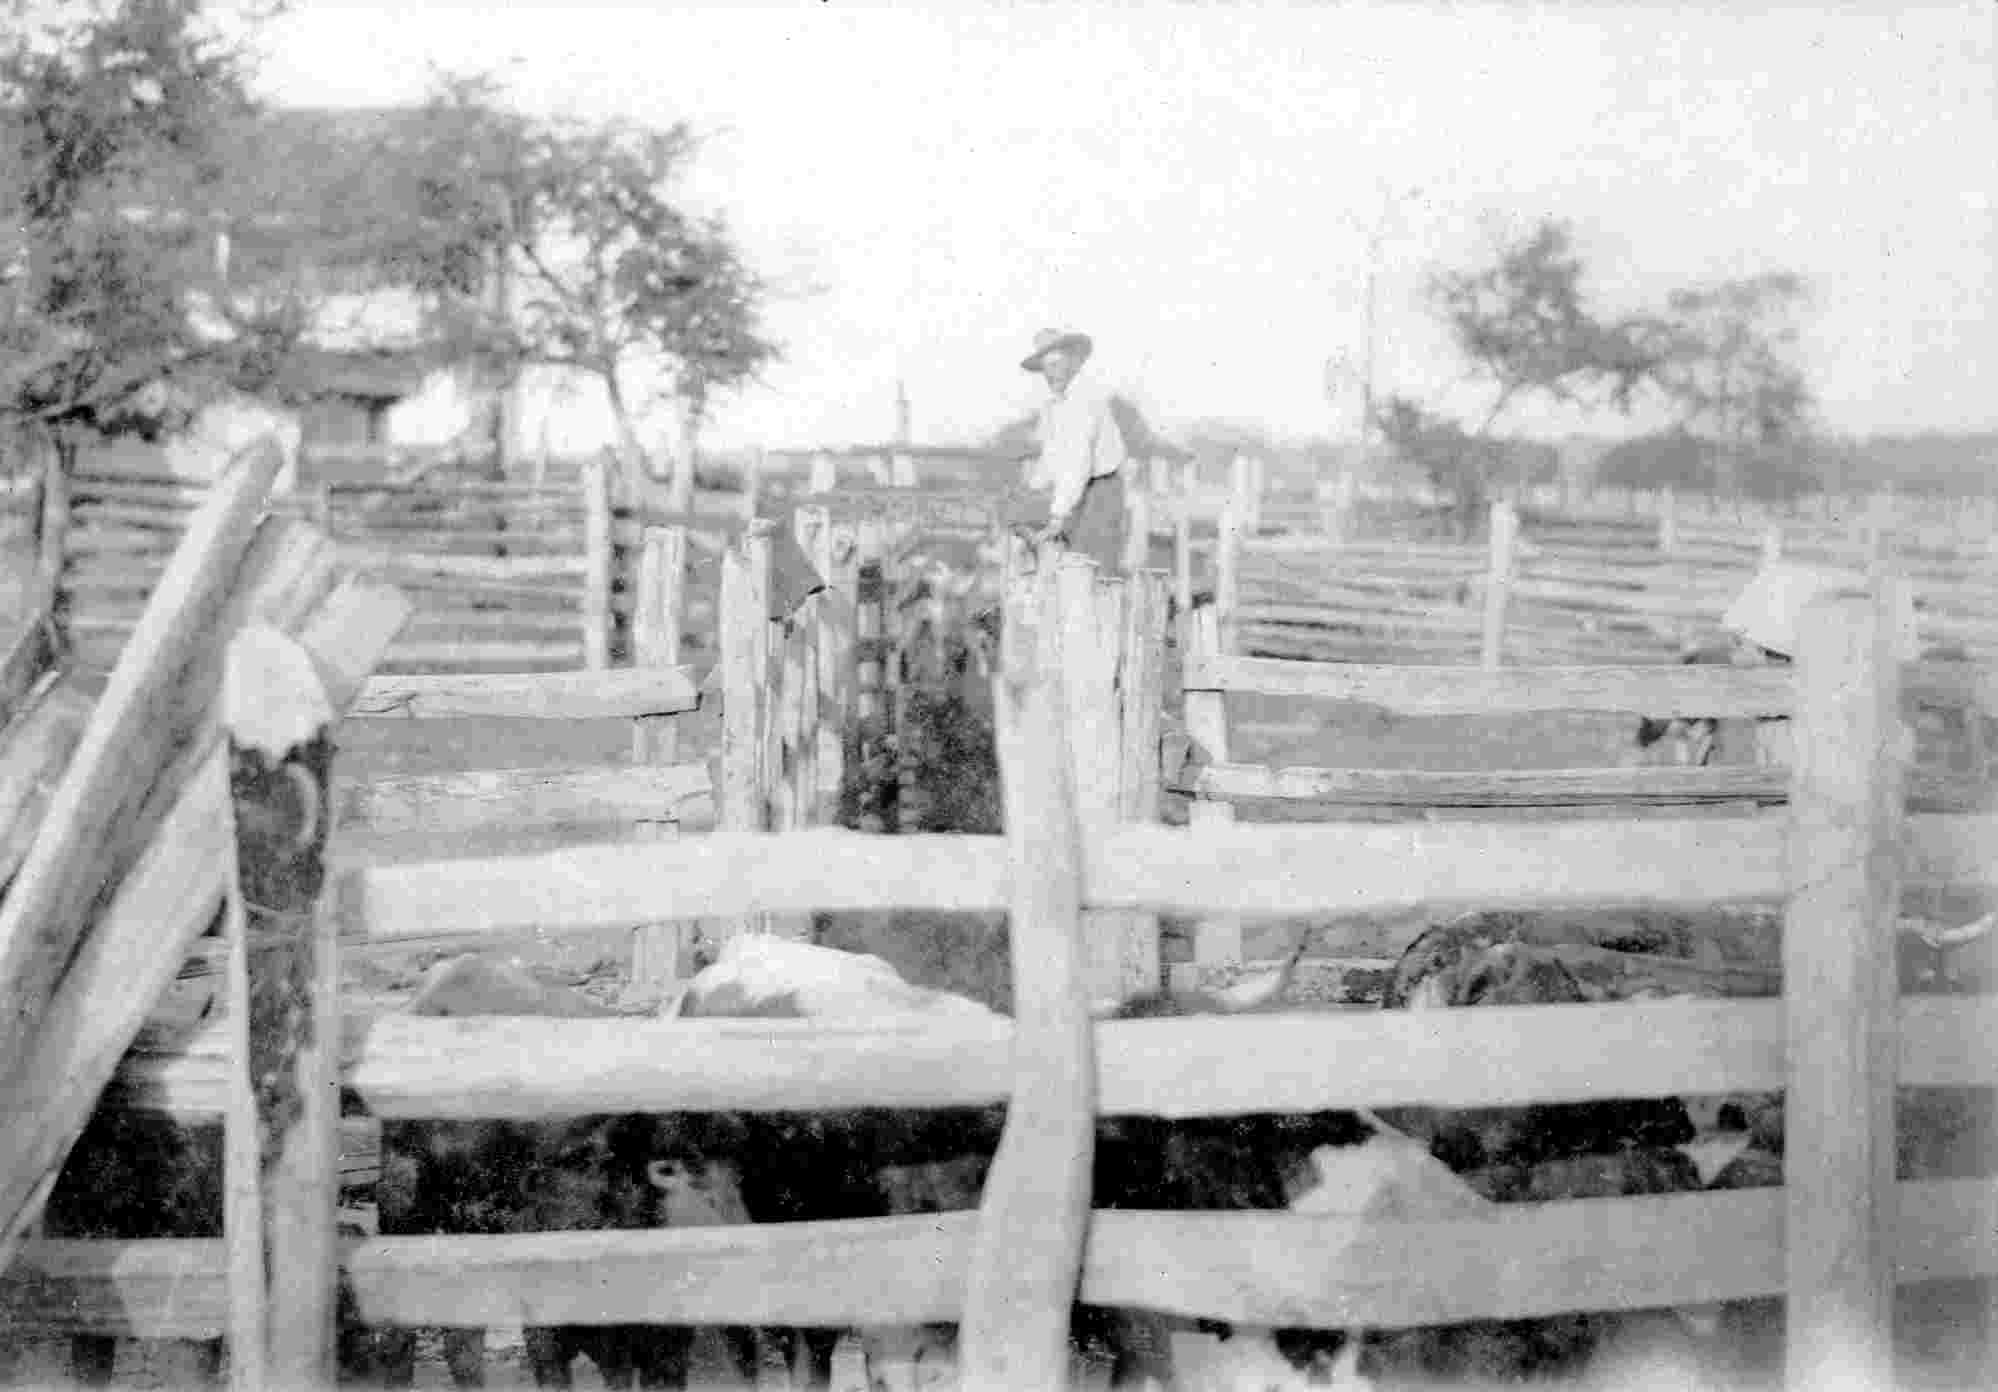 Cattle pens and the dipping vat in the 1890s. (Fort Bend County Museum Association collection.)